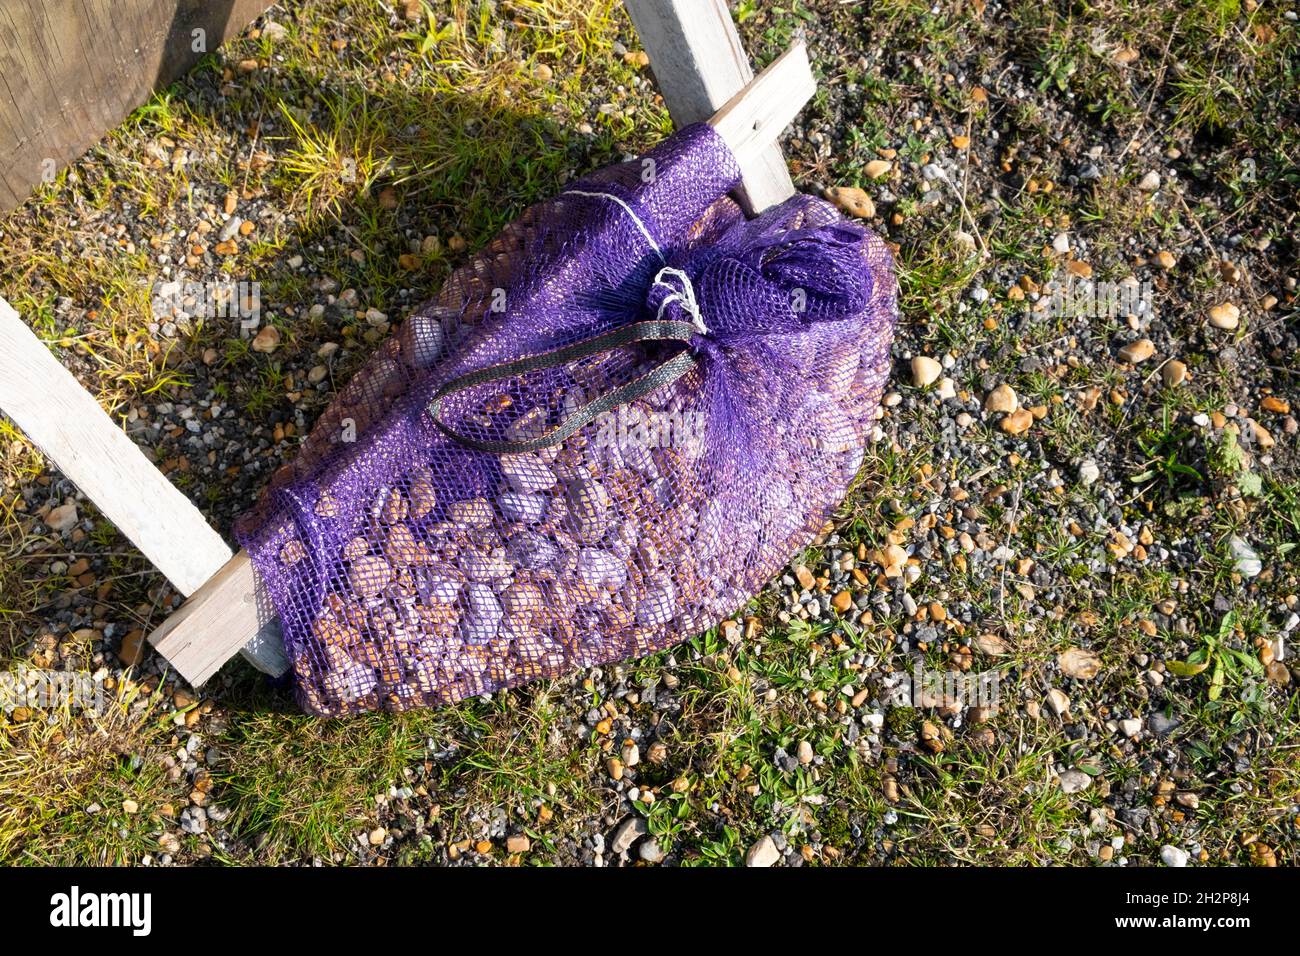 Purple plastic net netting bag sack being used as weight to weight down table legs and protect from wind on a beach Dungeness Kent UK.  KATHY DEWITT Stock Photo